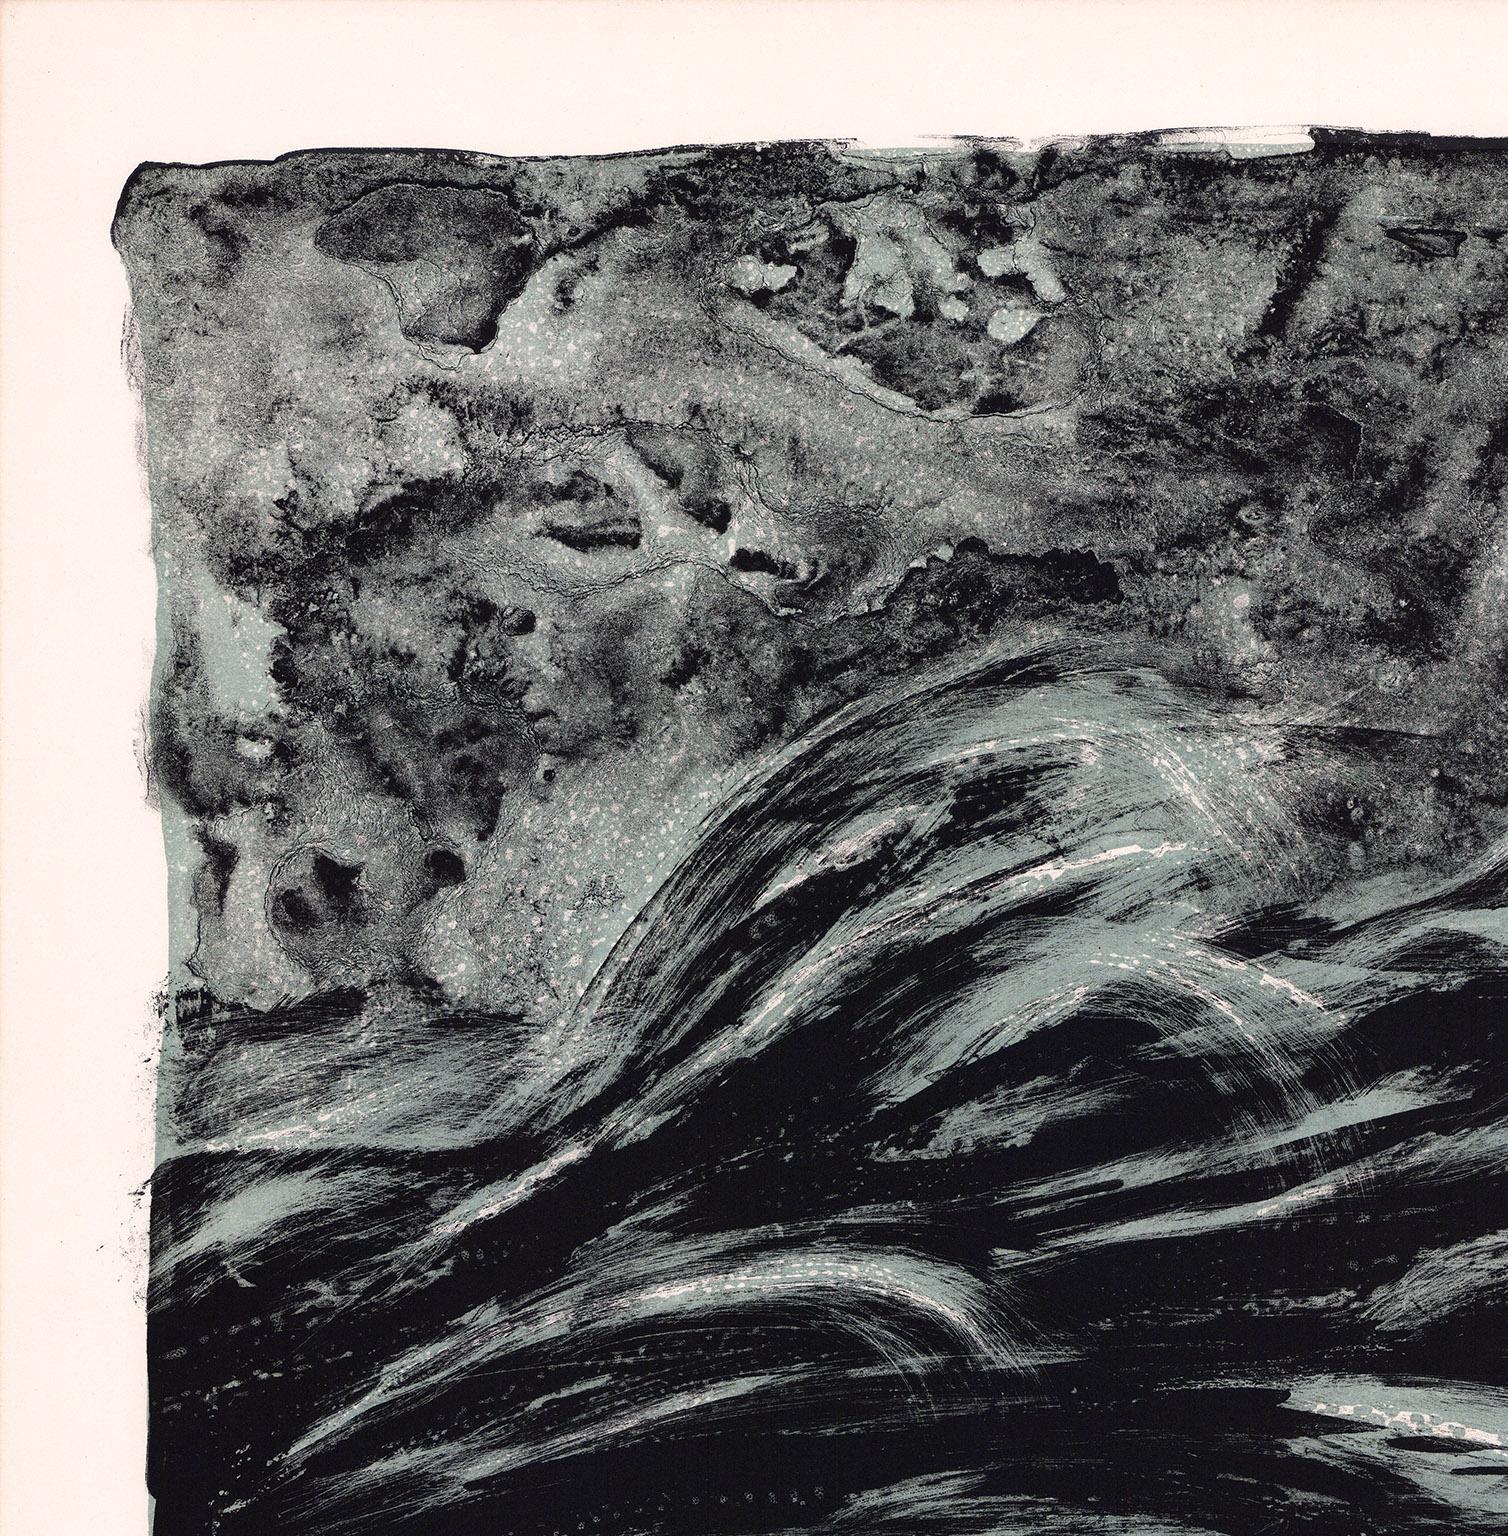 Richard Florsheim created this color lithograph entitled “Waves” in 1973 in an edition of 50 pieces.  Printed by Mourlot Press, Paris, this impression is signed and inscribed “3/50” – the third print of fifty. It is in good condition with full